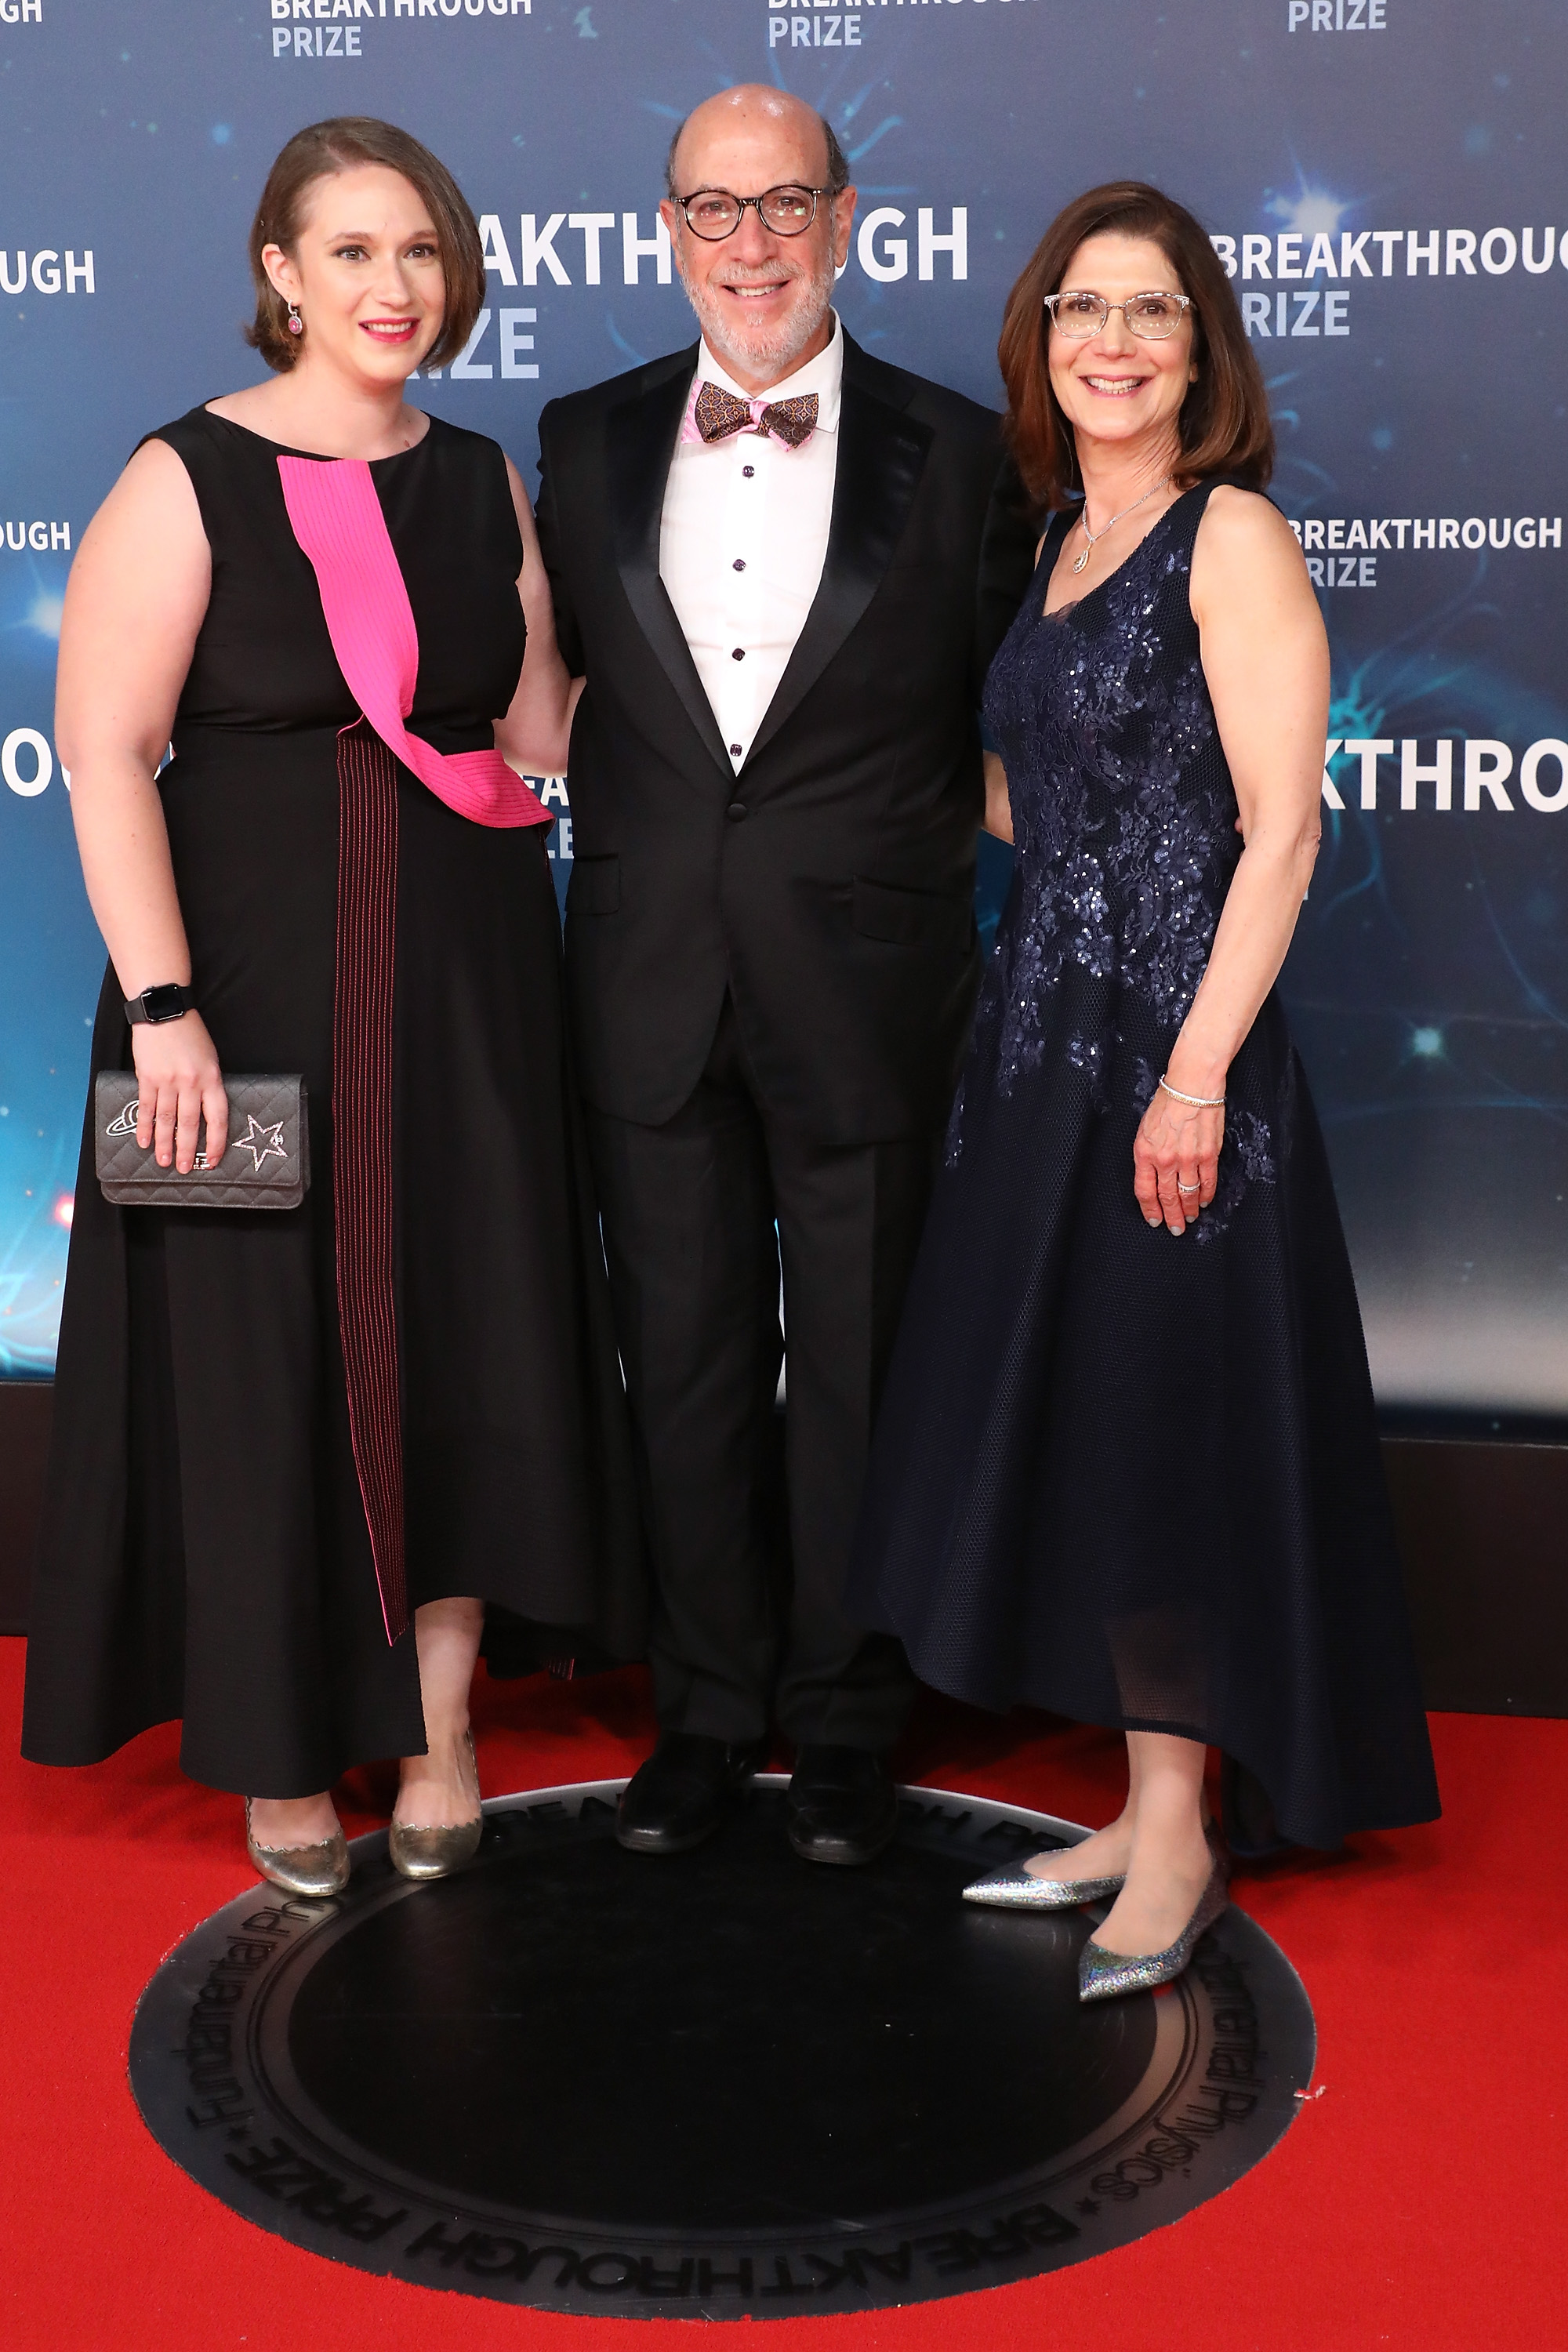 Edward Zuckerberg, Randi Zuckerberg, and Karen Zuckerberg attend Lincoln Center's American Songbook Gala at Alice Tully Hall on May 29, 2018, in New York City. | Source: Getty Images